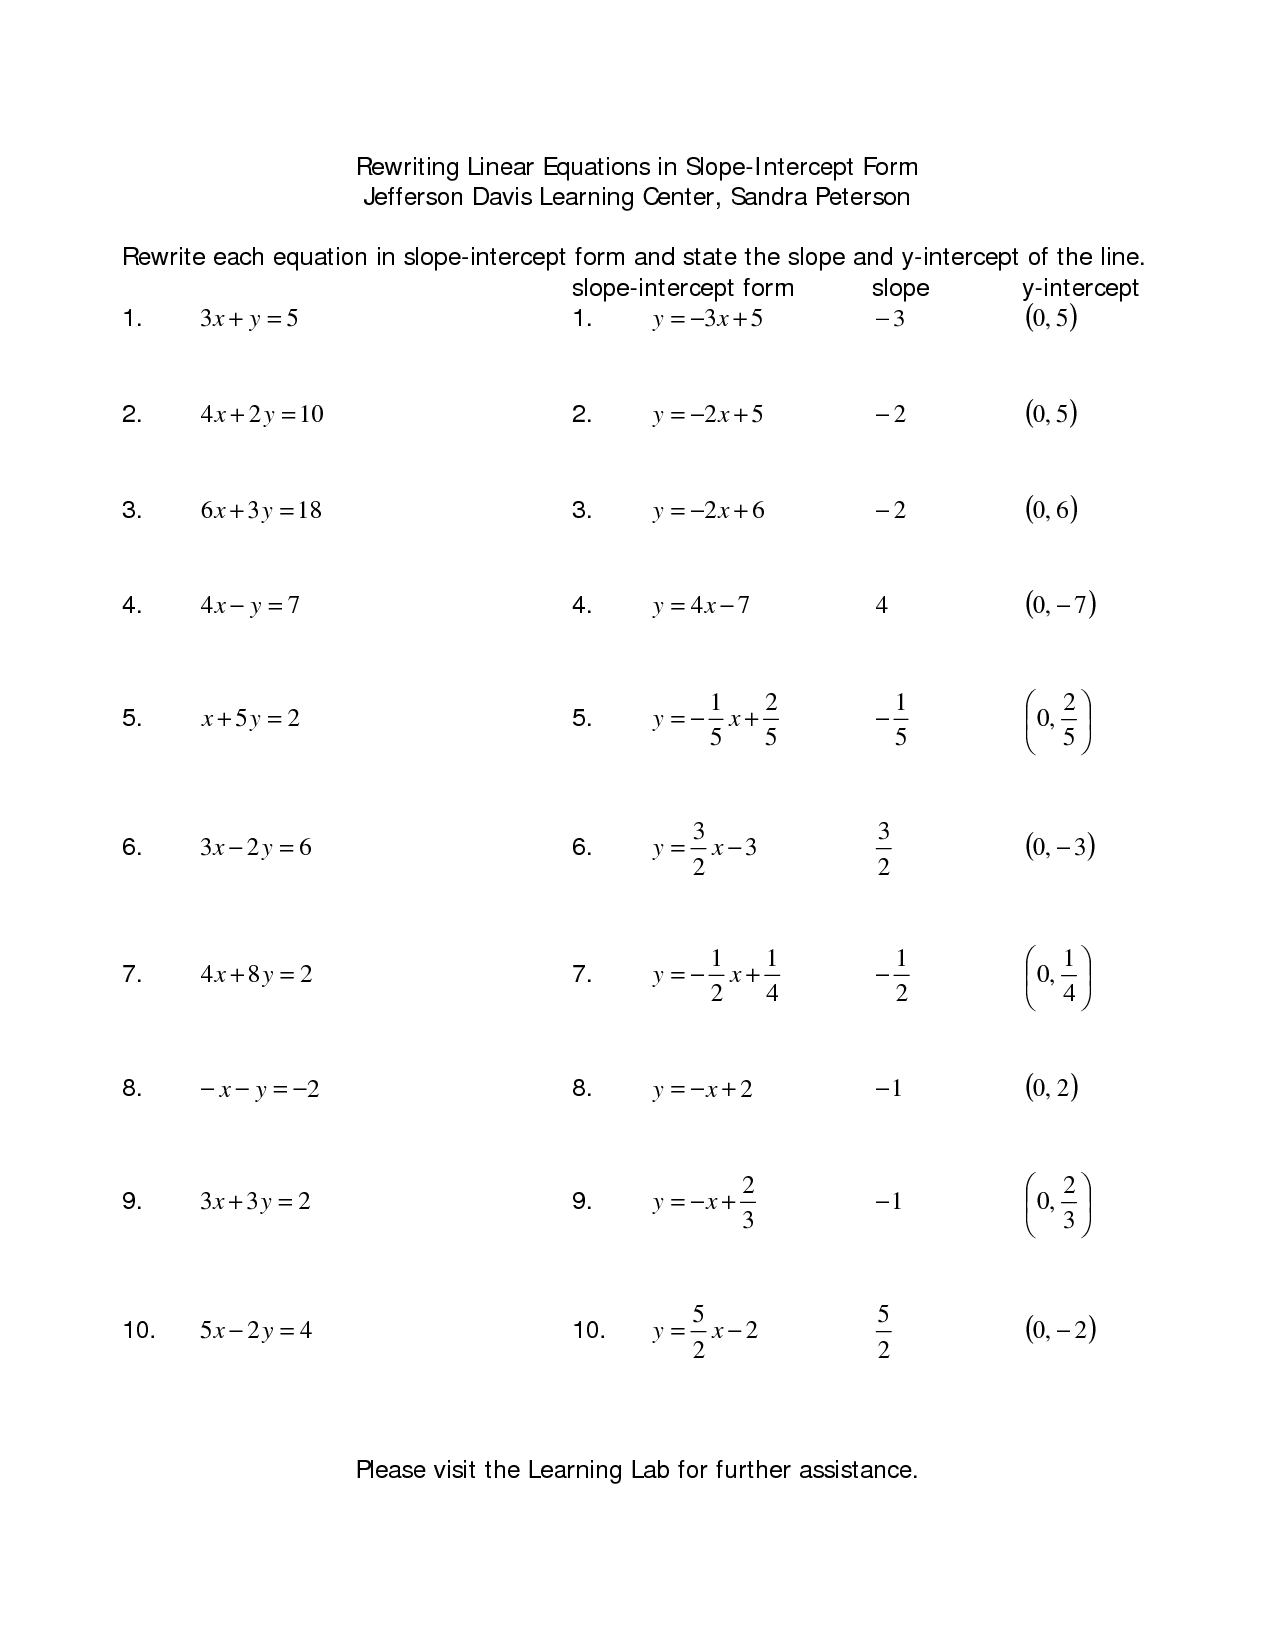 Linear Equations in Slope-Intercept Form